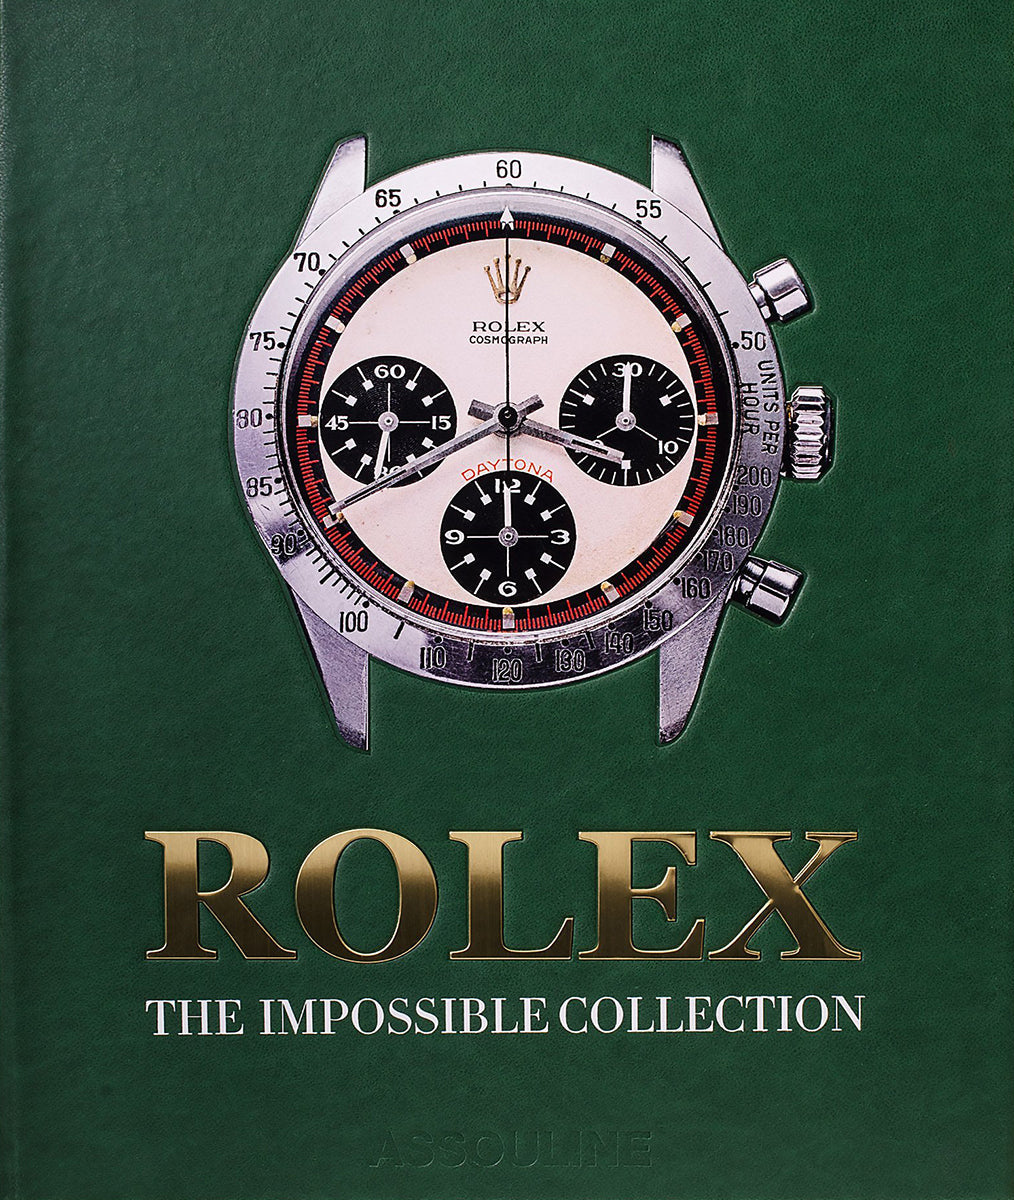 Asnouline Rolex: The Impossible Collection